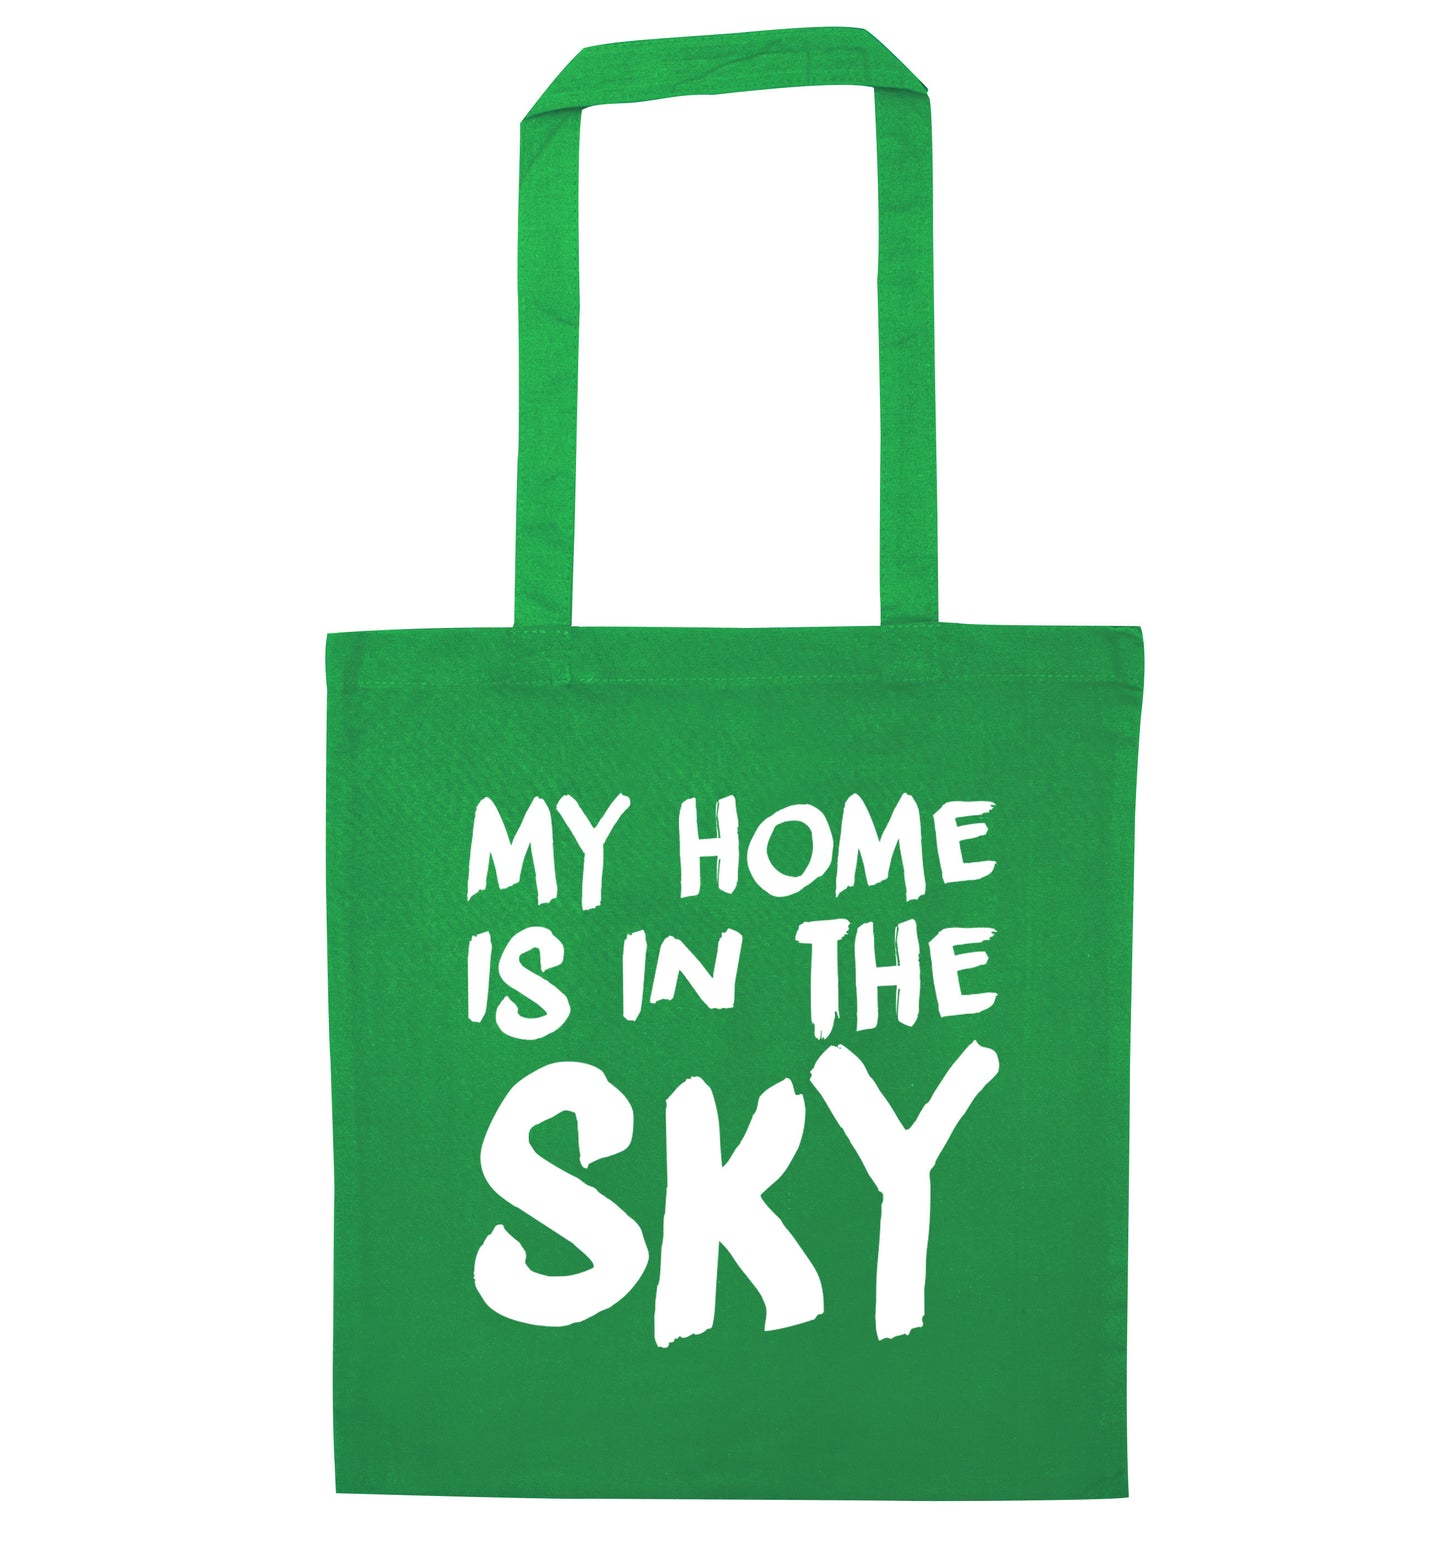 My home is in the sky green tote bag